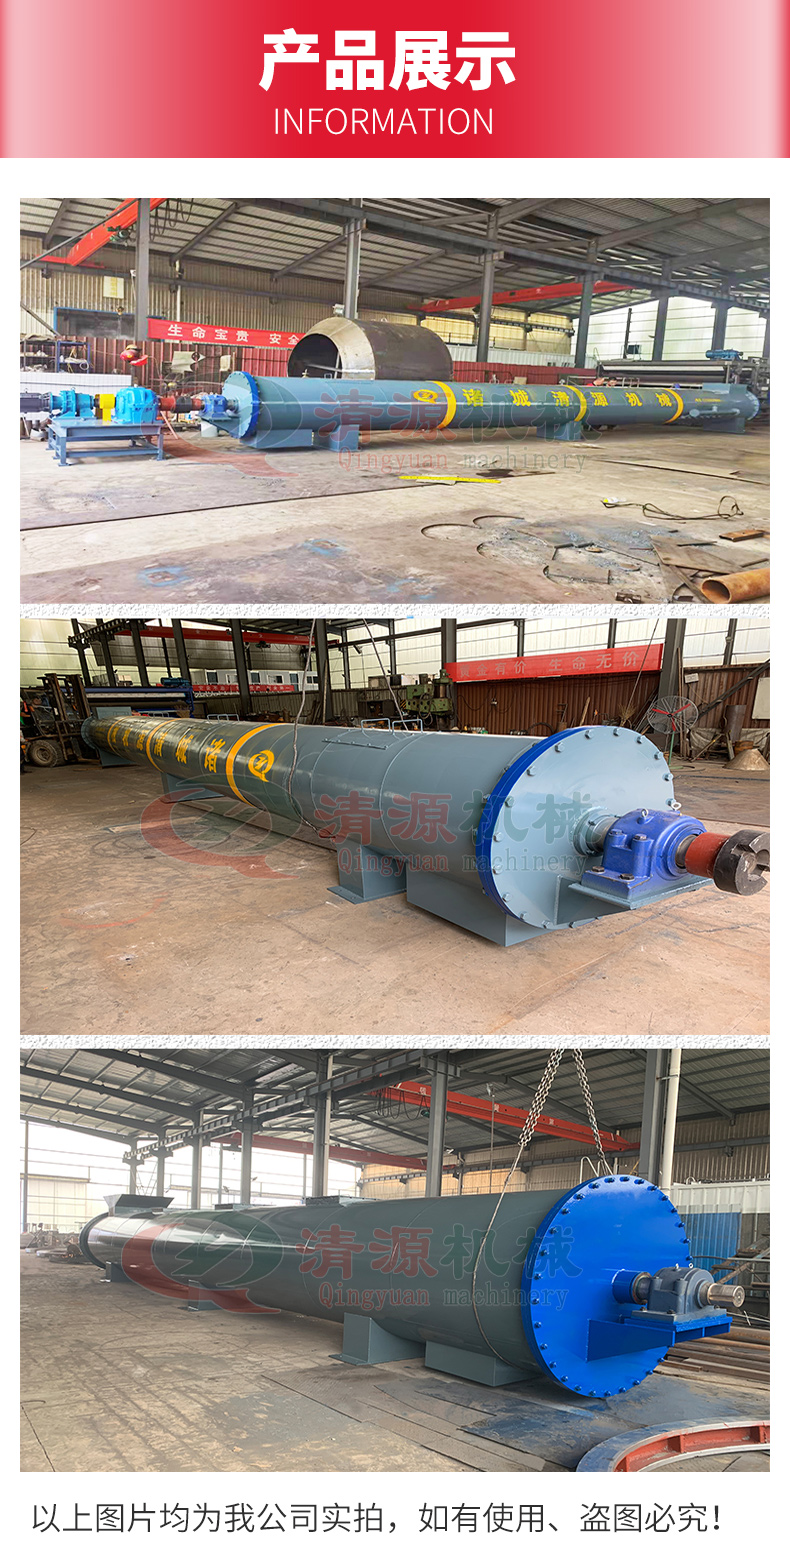 Paper making spiral digester, continuous straw cooking tube, straw pulp softening equipment, customized for many years by Qingyuan